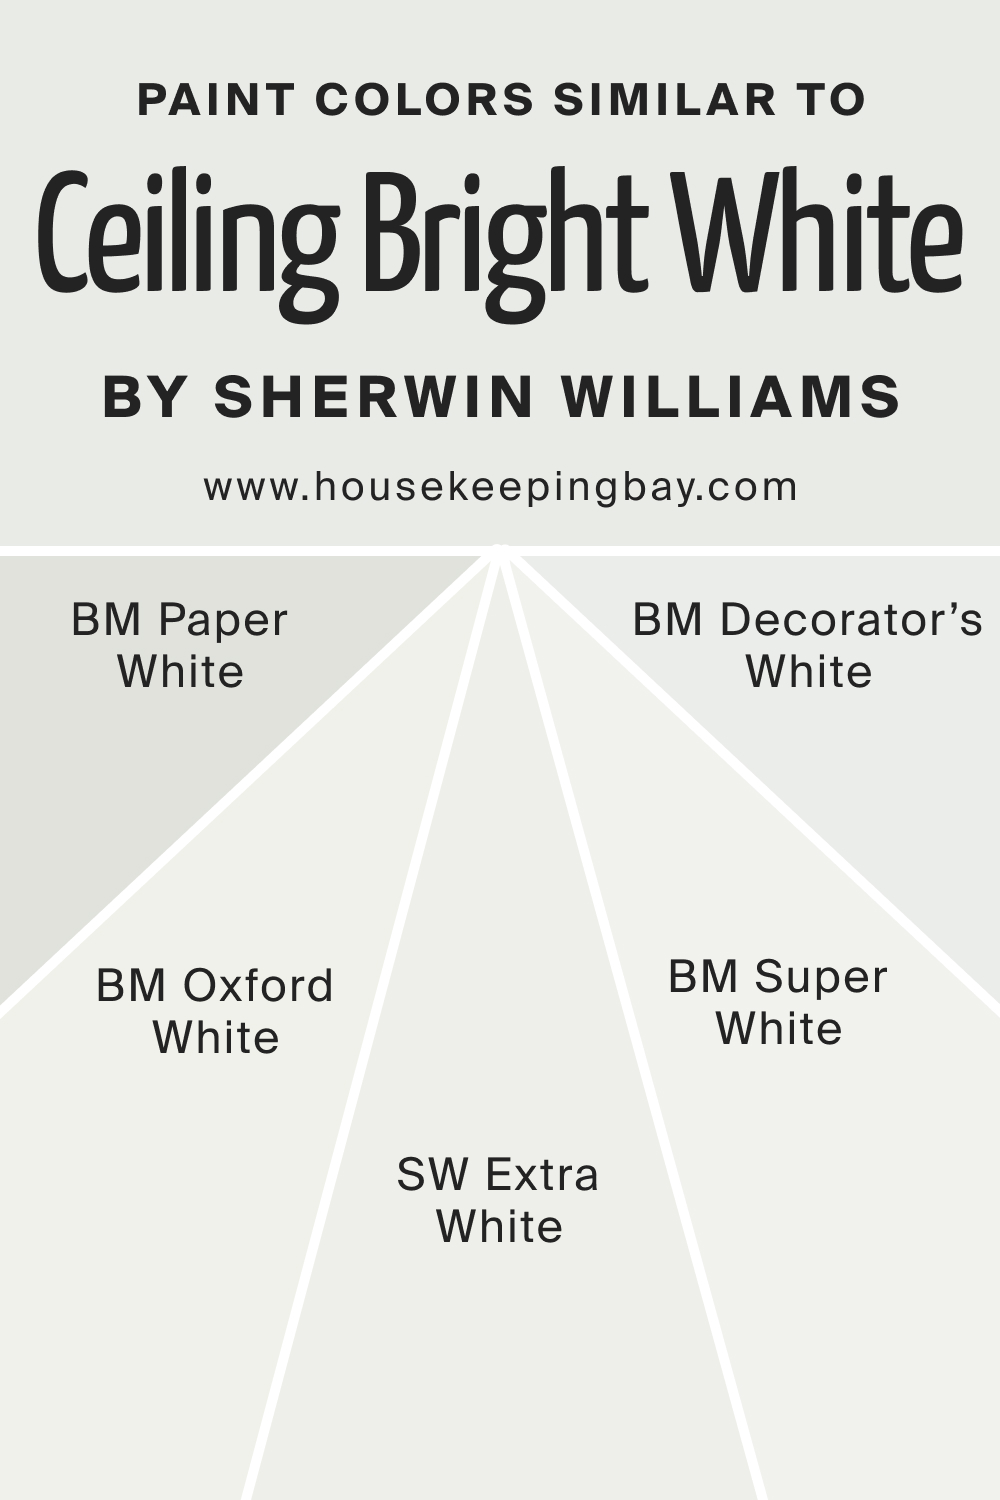 Paint Colors Similar to SW Ceiling Bright White by Sherwin Williams